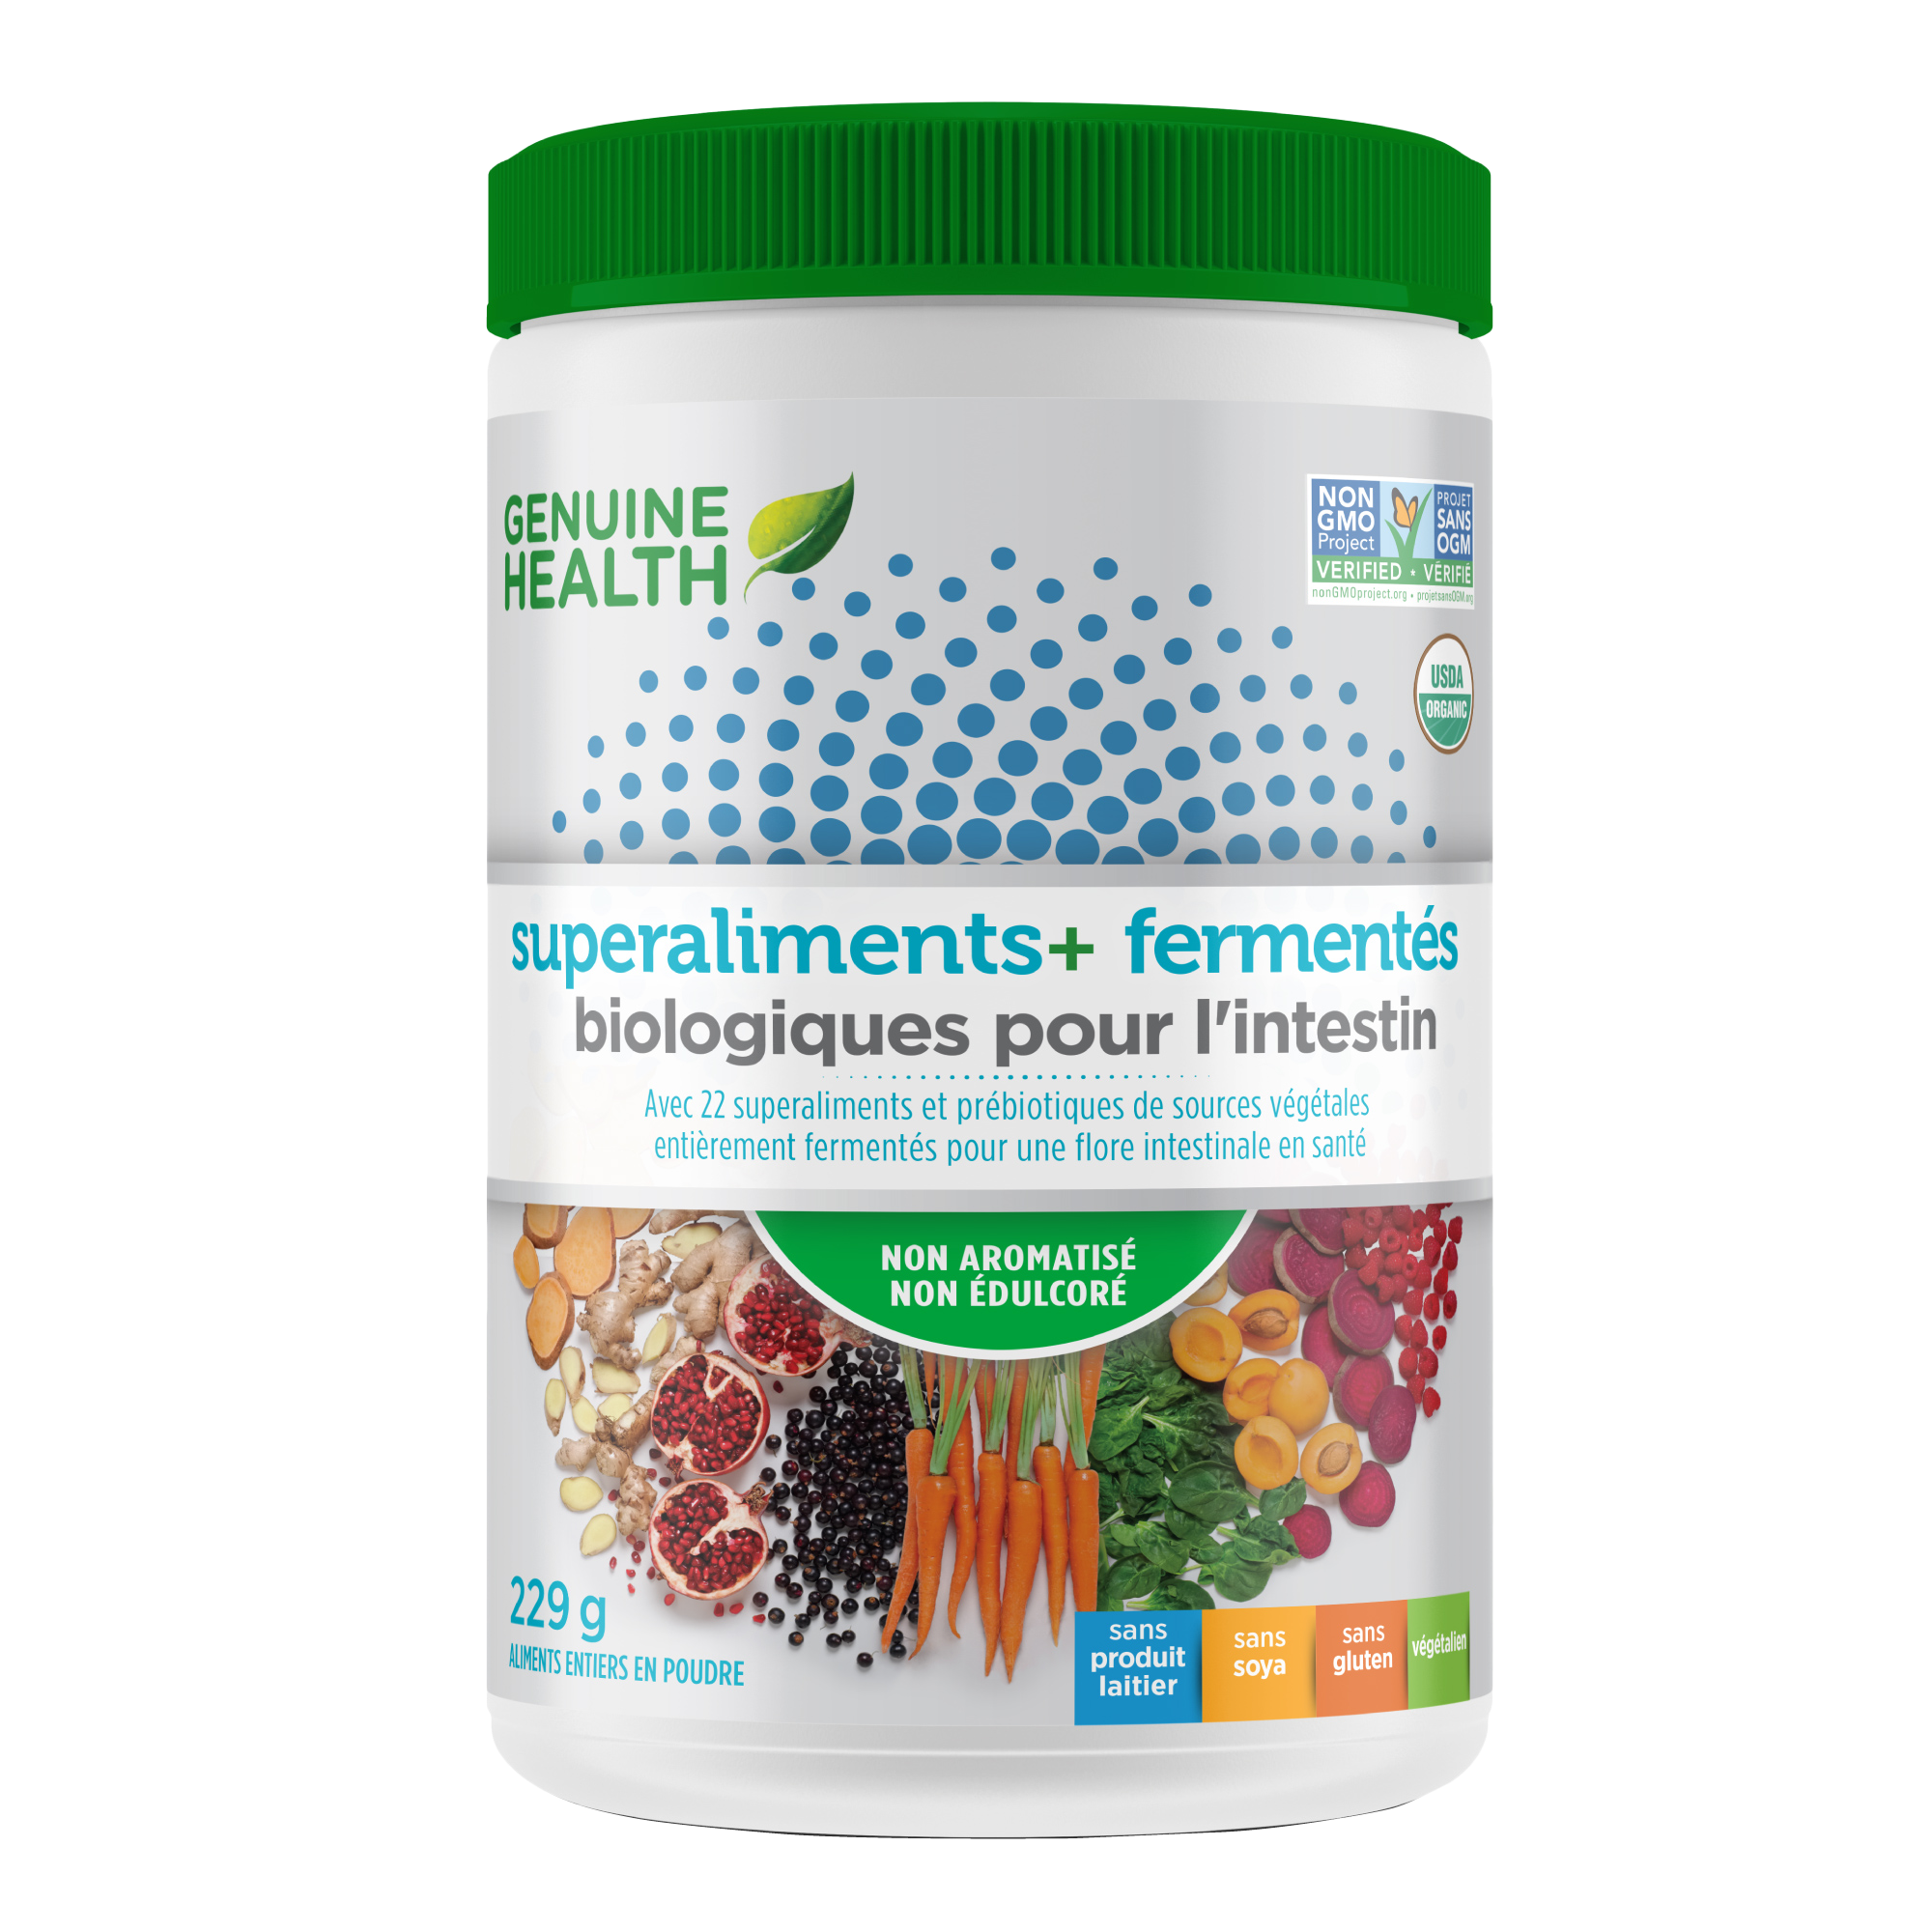 Genuine Health fermented organic gut superfoods unflavoured (229 g)